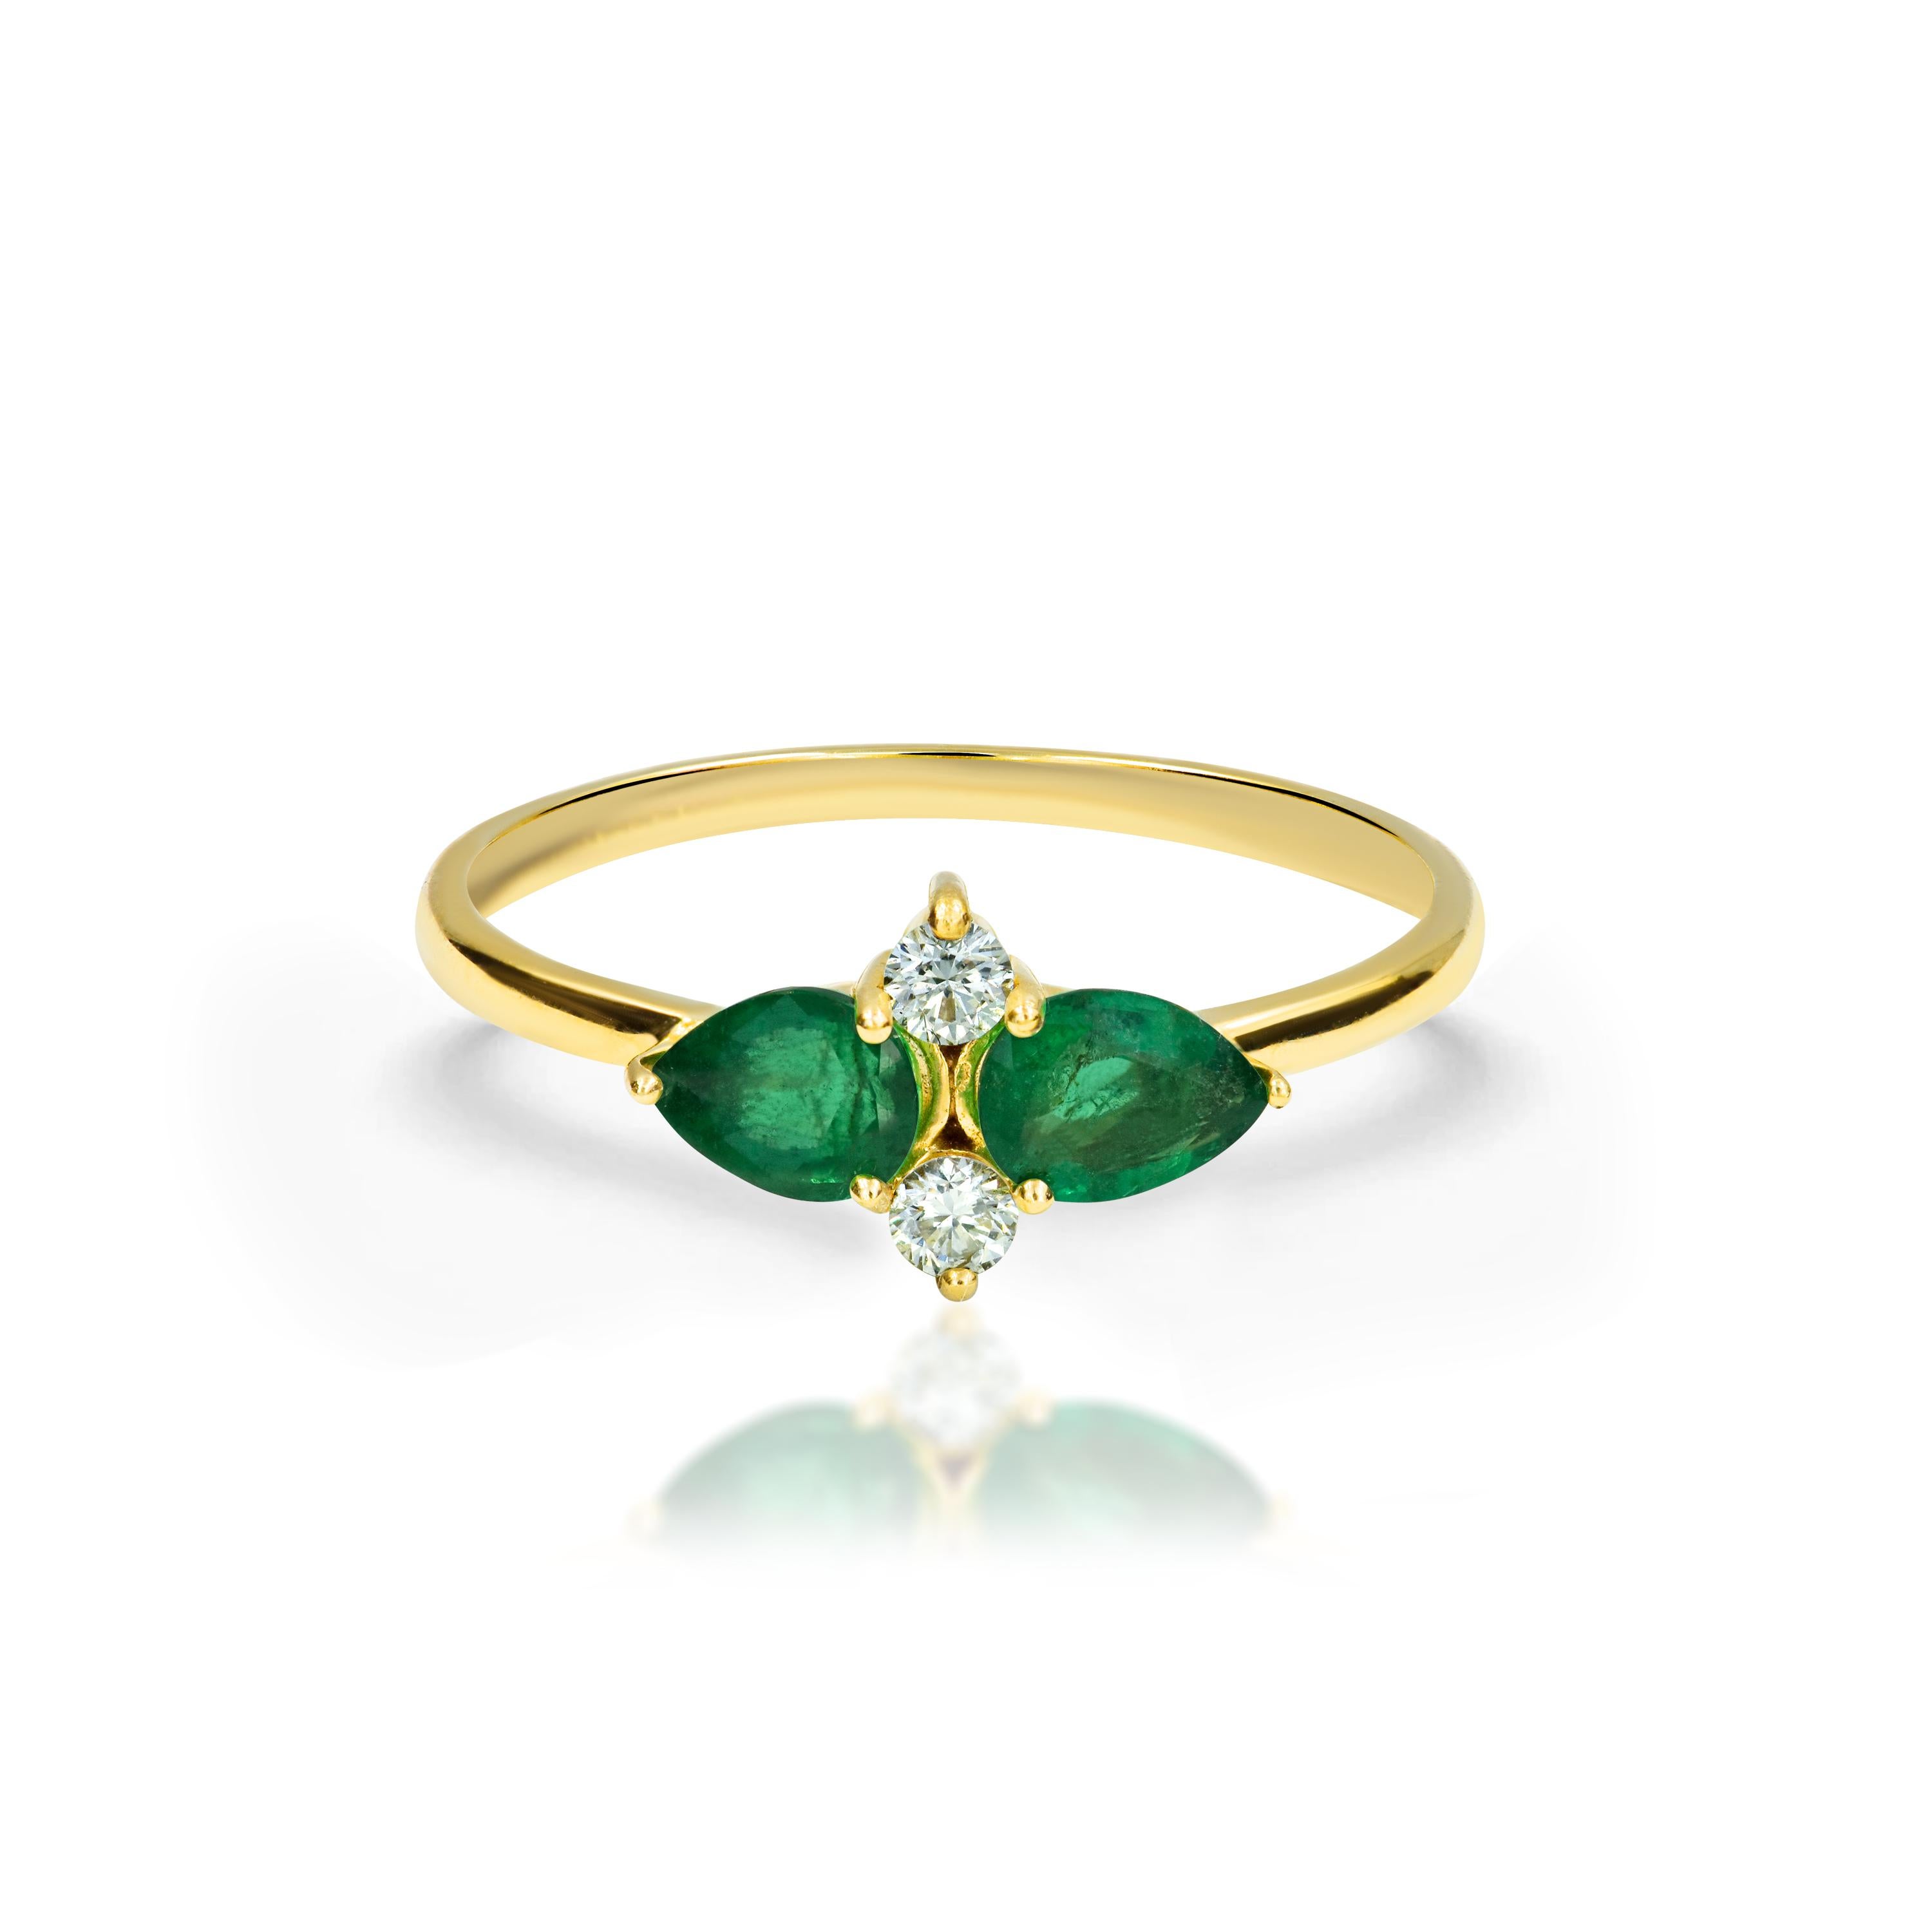 For Sale:  14k Gold Pear Shape 0.56 Carat Emerald and Diamond Engagement Ring 3